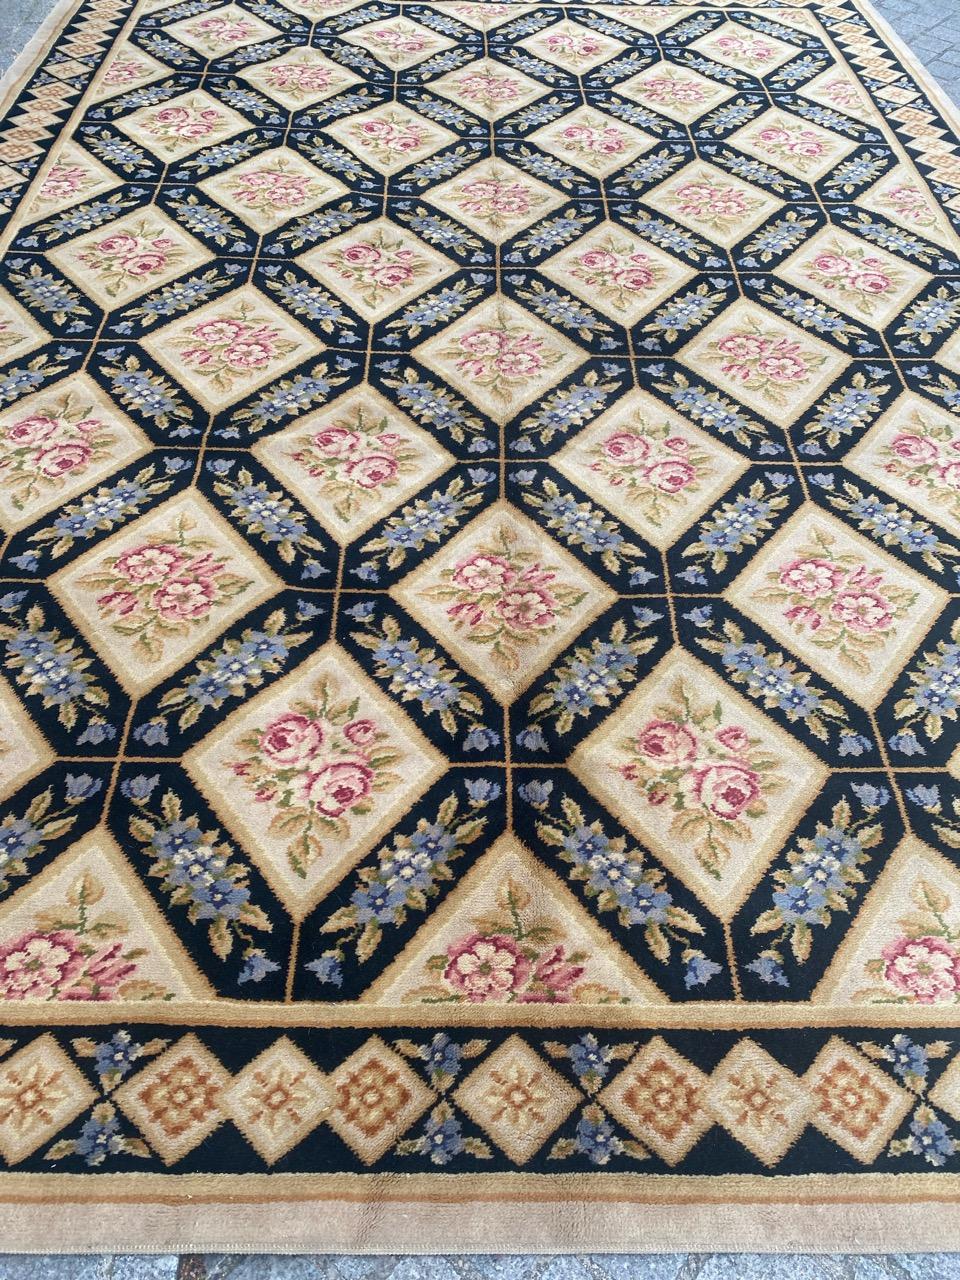 Pretty mid century french Aubusson rug with beautiful floral and geometrical Louis XVI style design and nice colors, entirely knotted with wool velvet on cotton foundation.

✨✨✨
